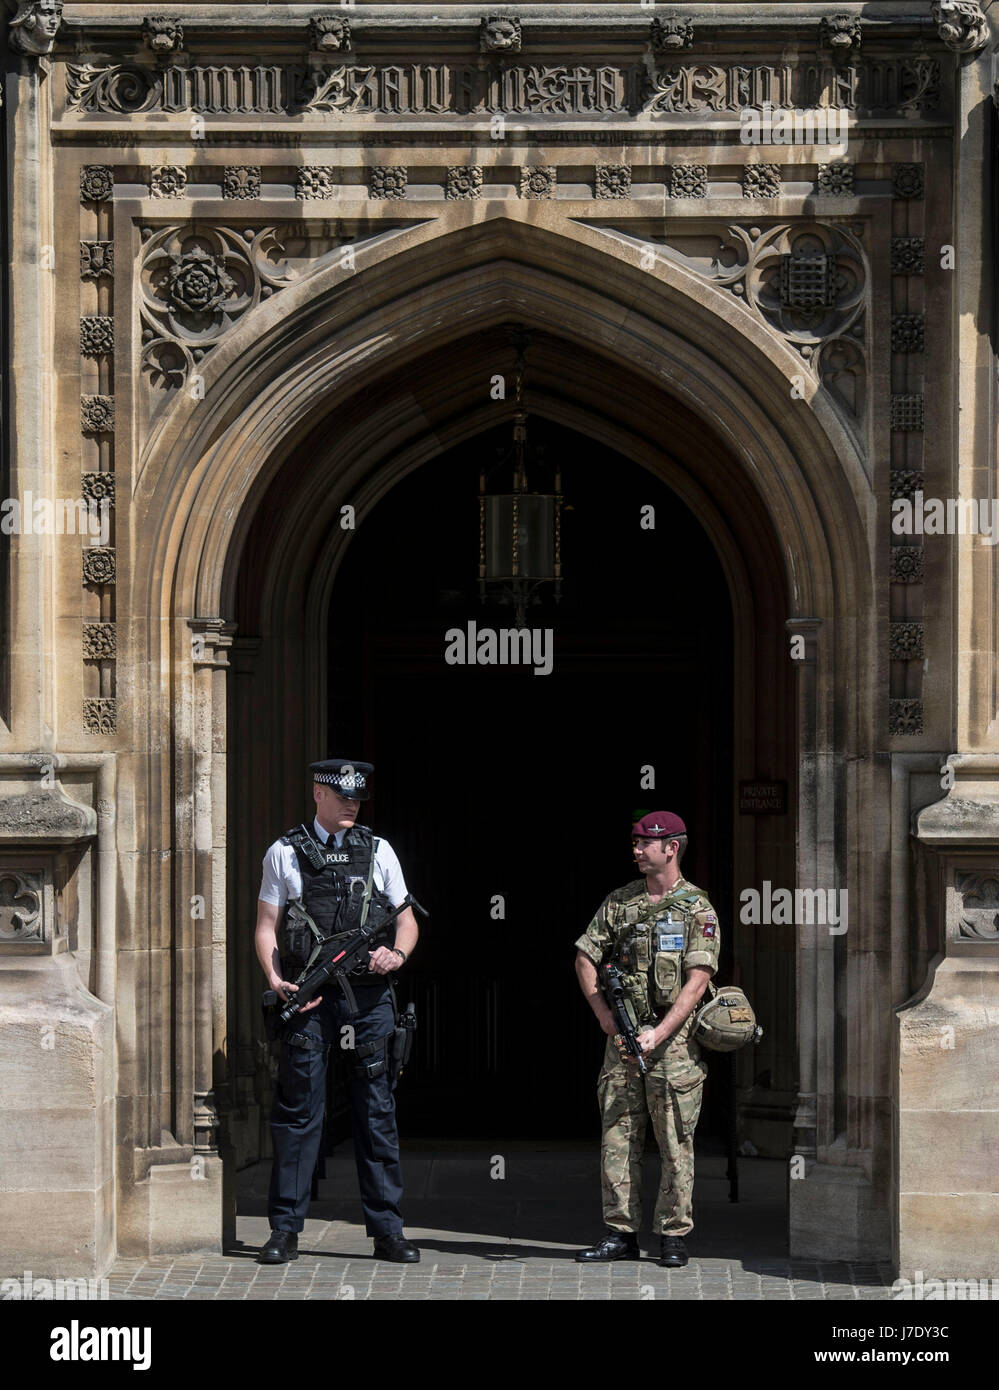 Members of the army join police officers in Westminster, London, after Scotland Yard announced armed troops will be deployed to guard "key locations" such as Buckingham Palace, Downing Street, the Palace of Westminster and embassies. Stock Photo